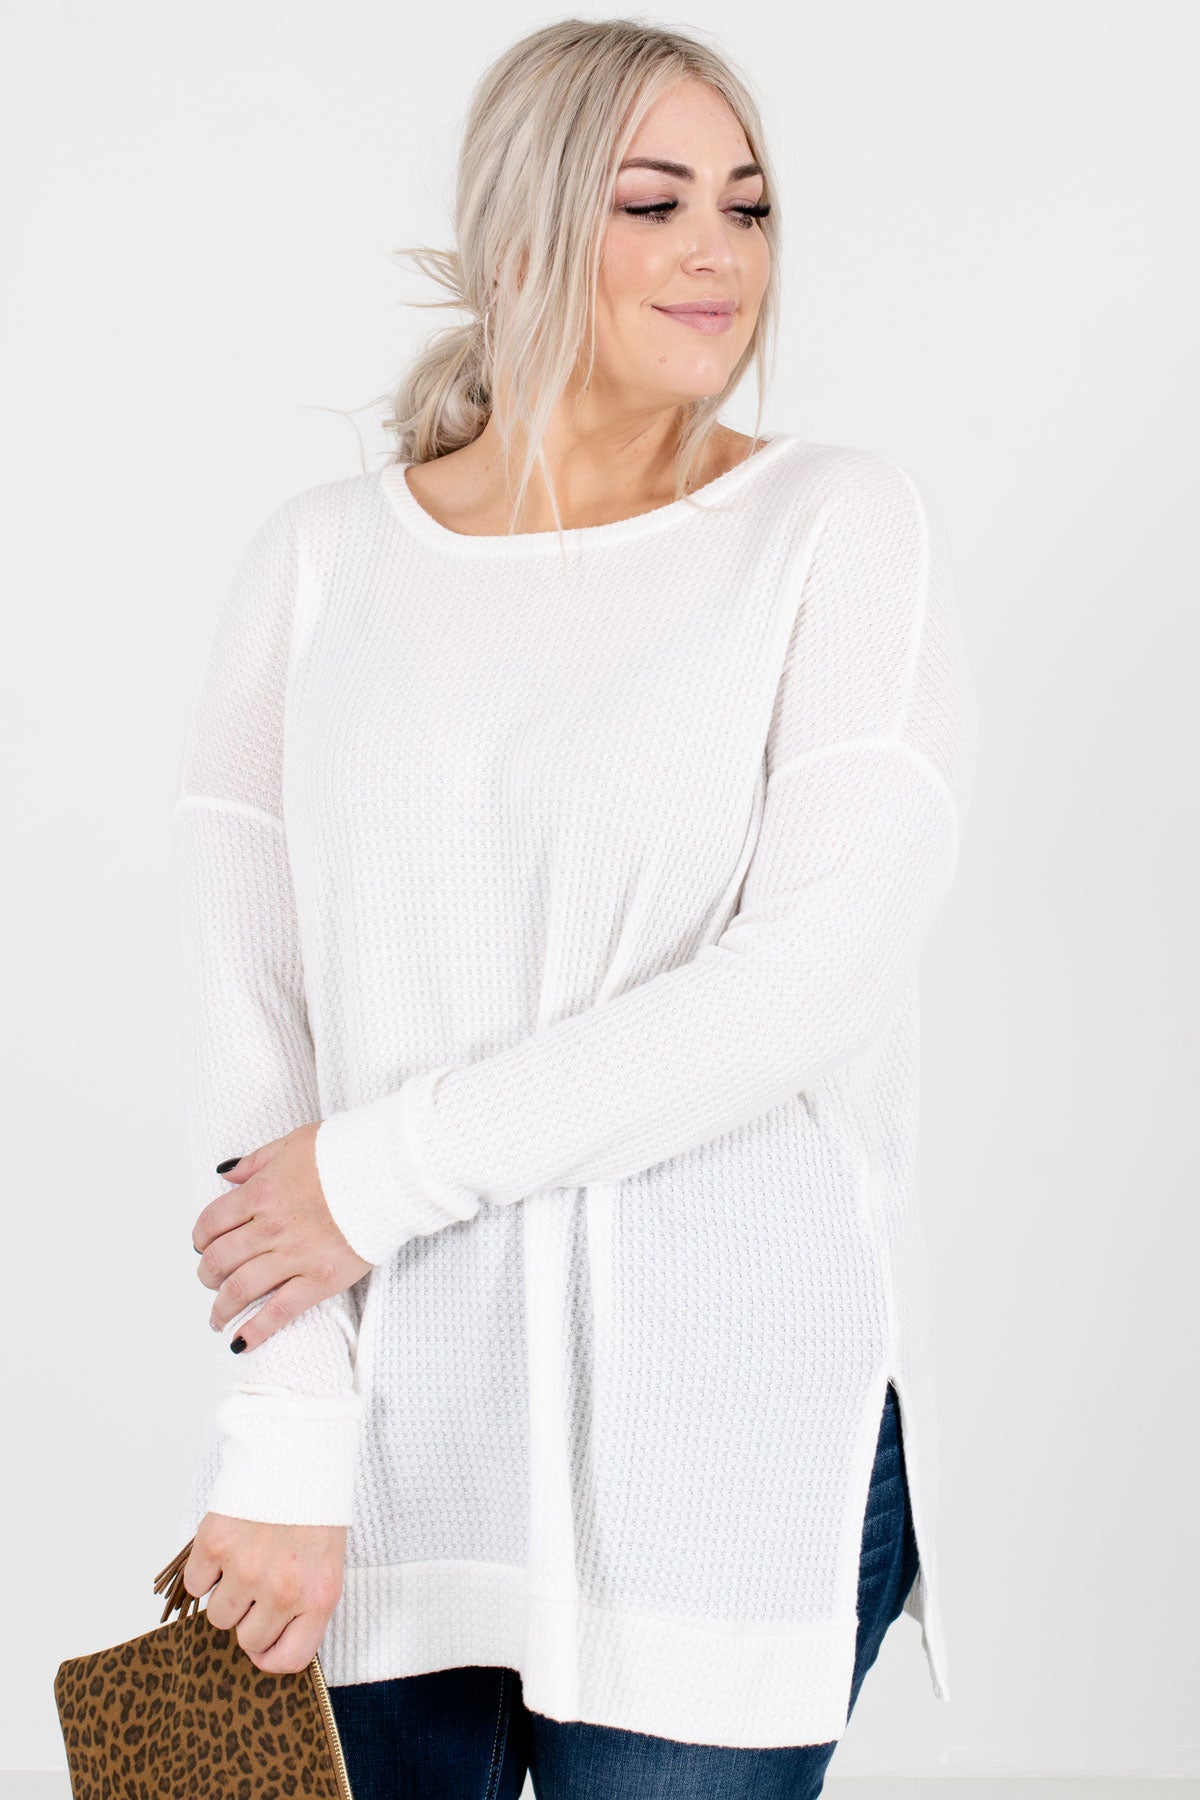 Women's White Warm and Cozy Boutique Tops